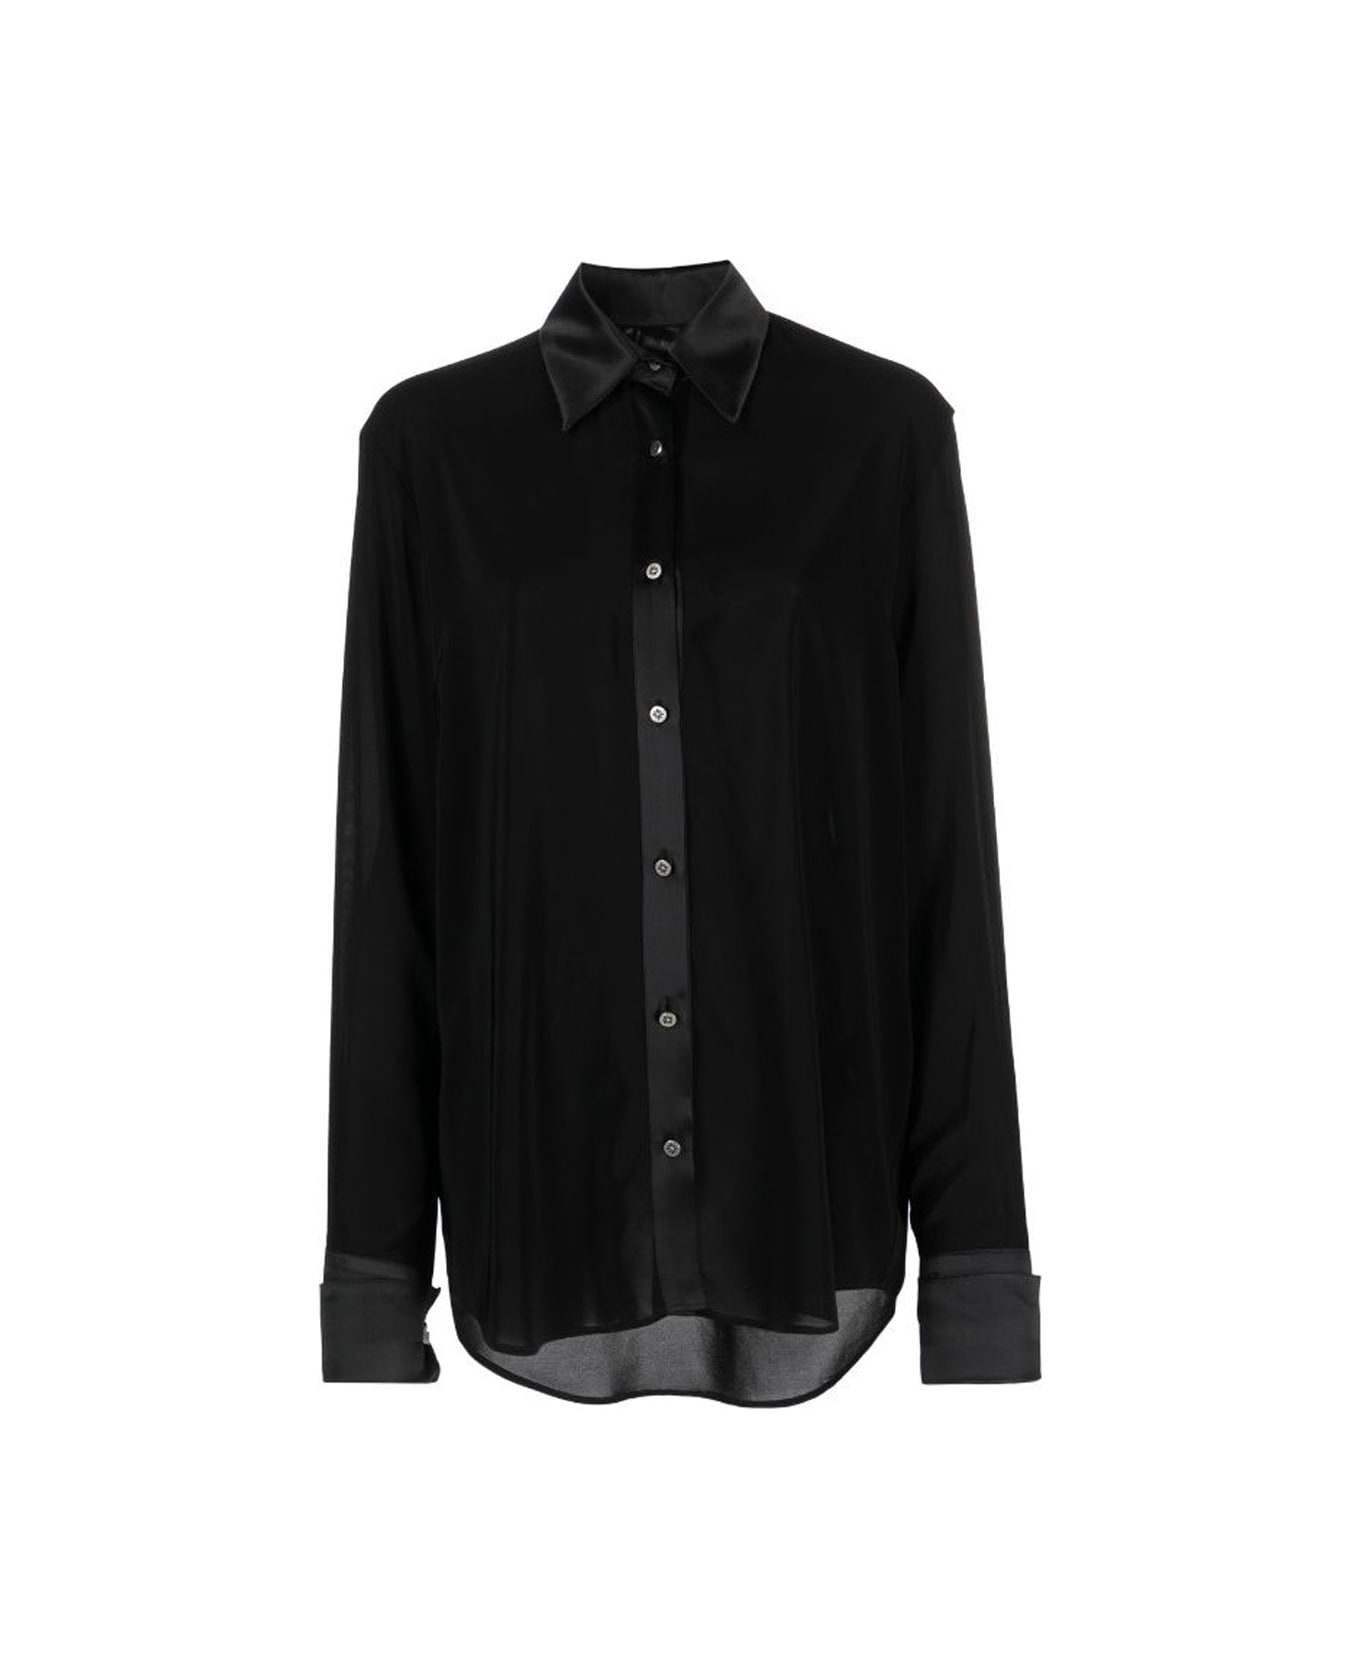 John Richmond Shirt With Contrasting Fabrics And Wide Long Sleeves. Frontalt Fastener By Buttons. - Nero